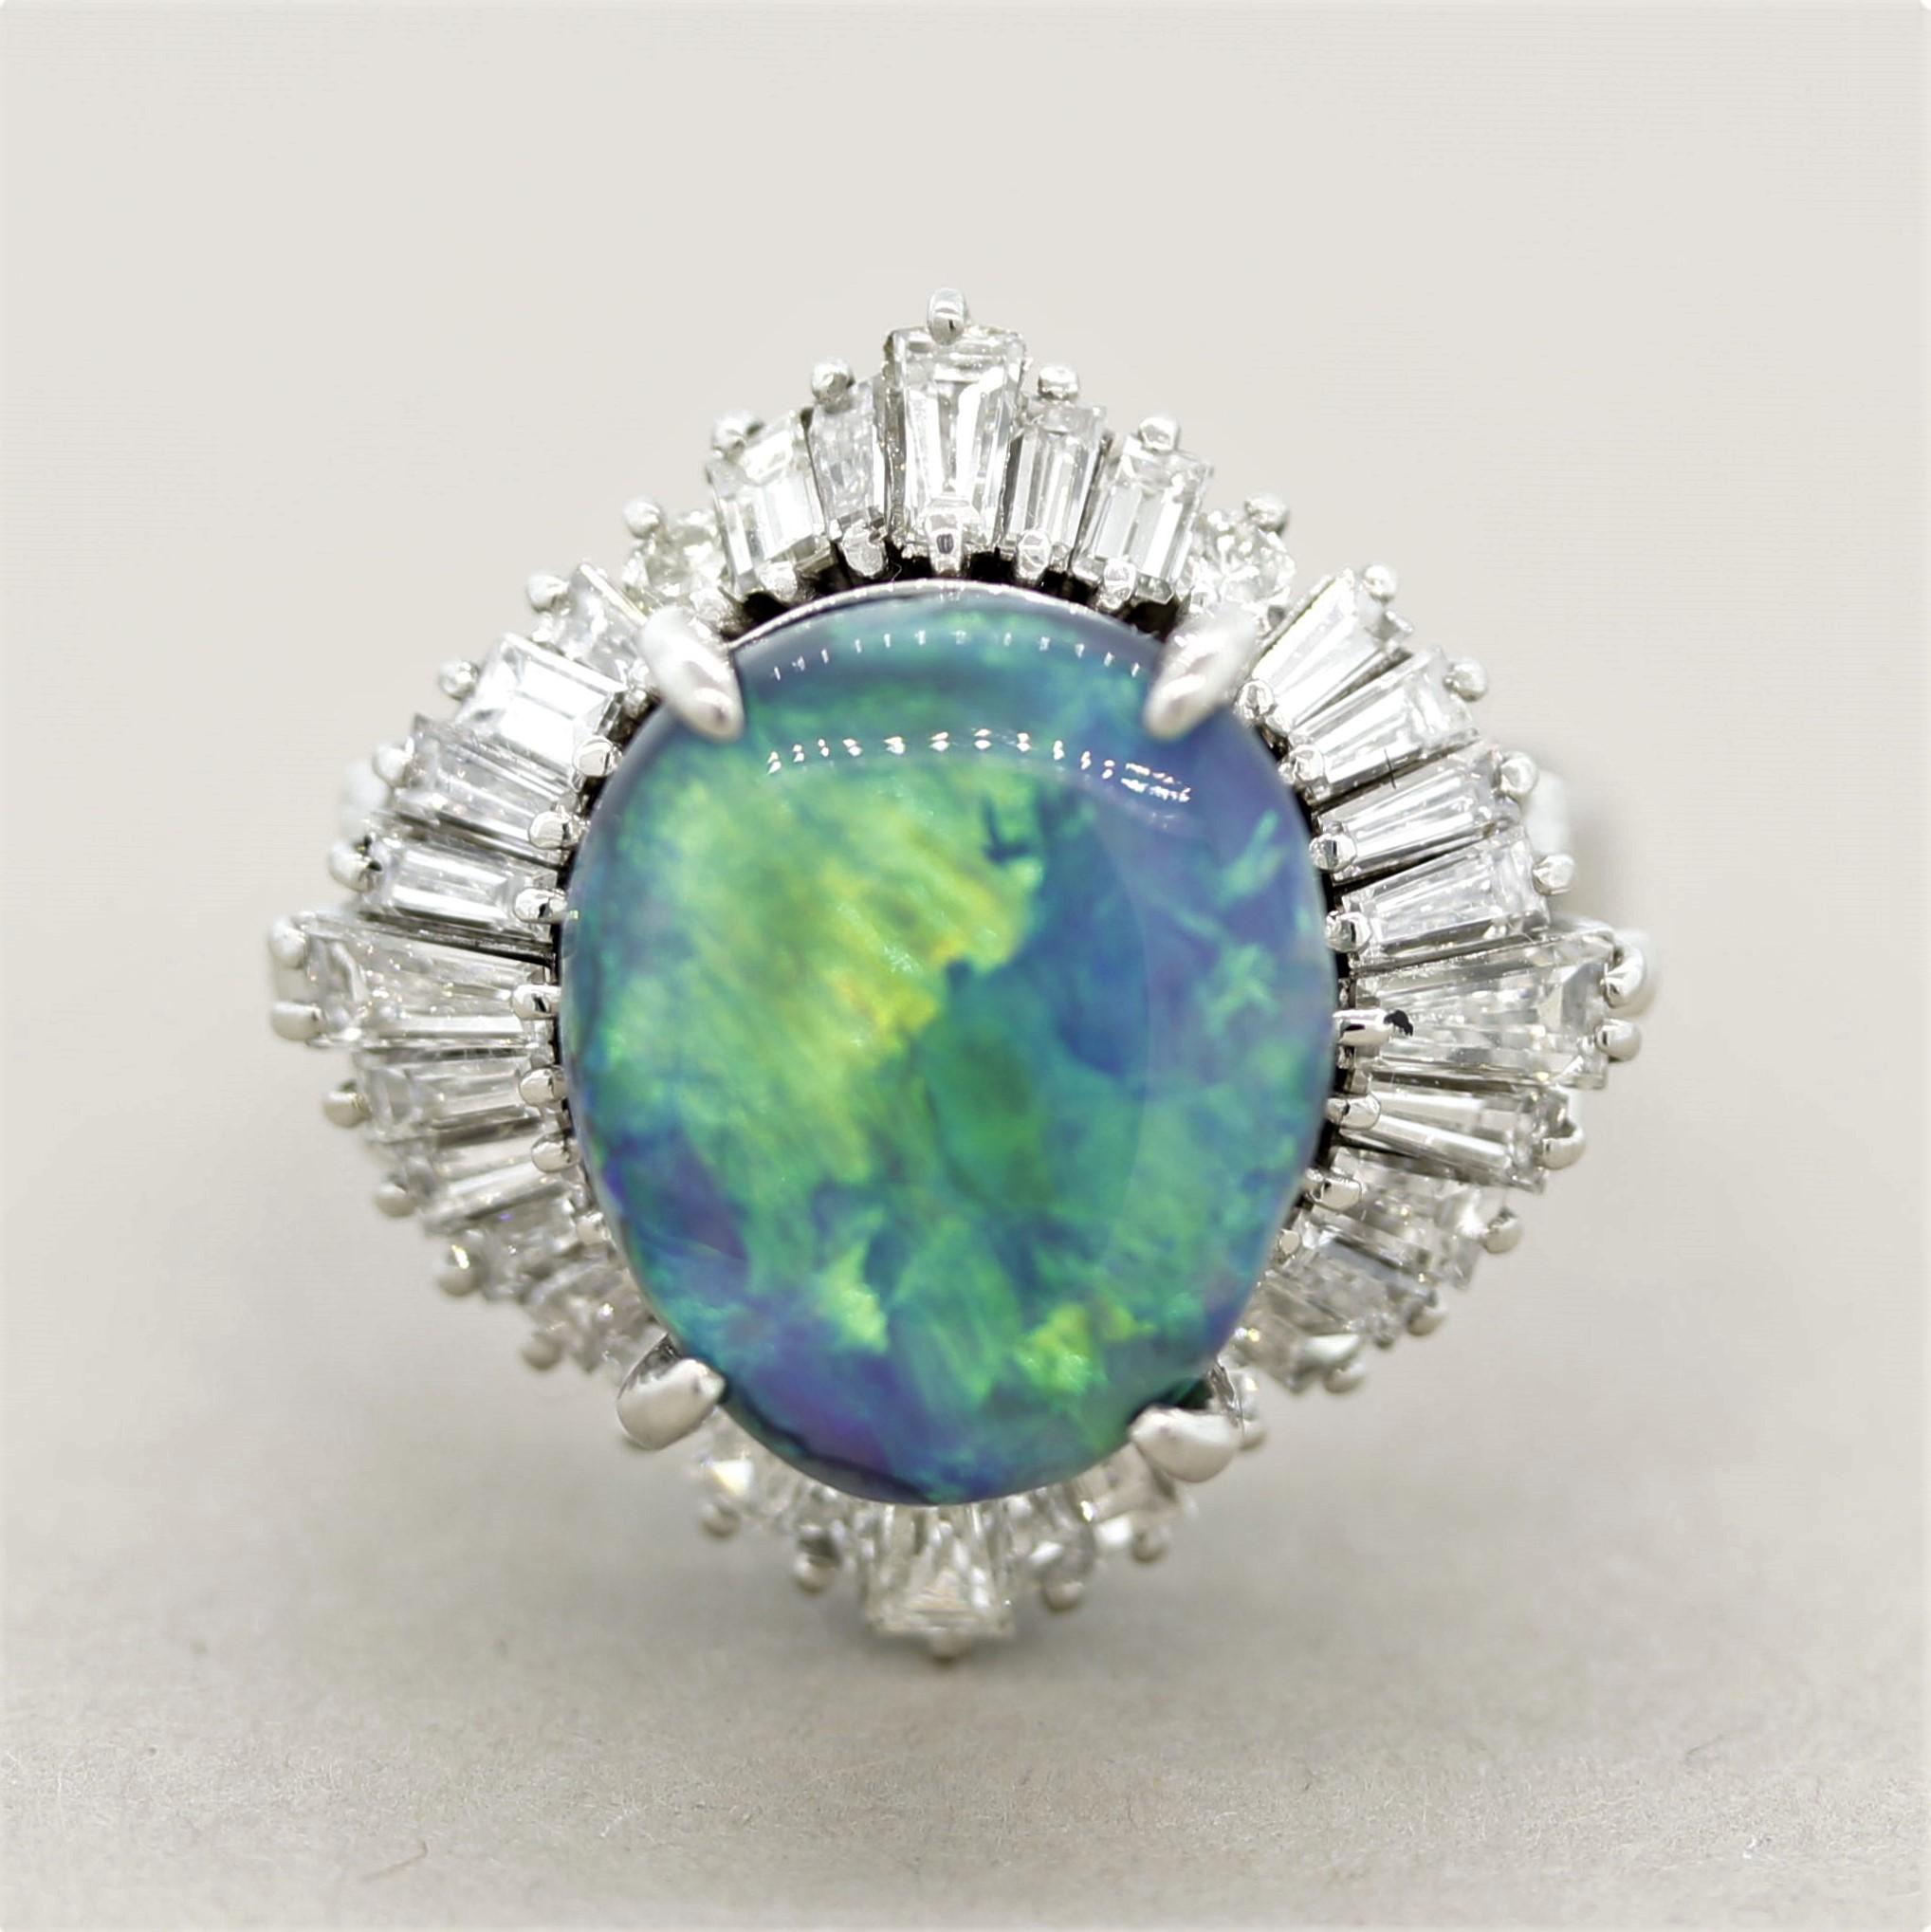 A large and impressive ring featuring a natural black opal from Australia! It weighs 4.42 carats and has excellent play-of-color as large and bright flashes of blue and green can be seen across the stone. It is accented by 1.59 carats of